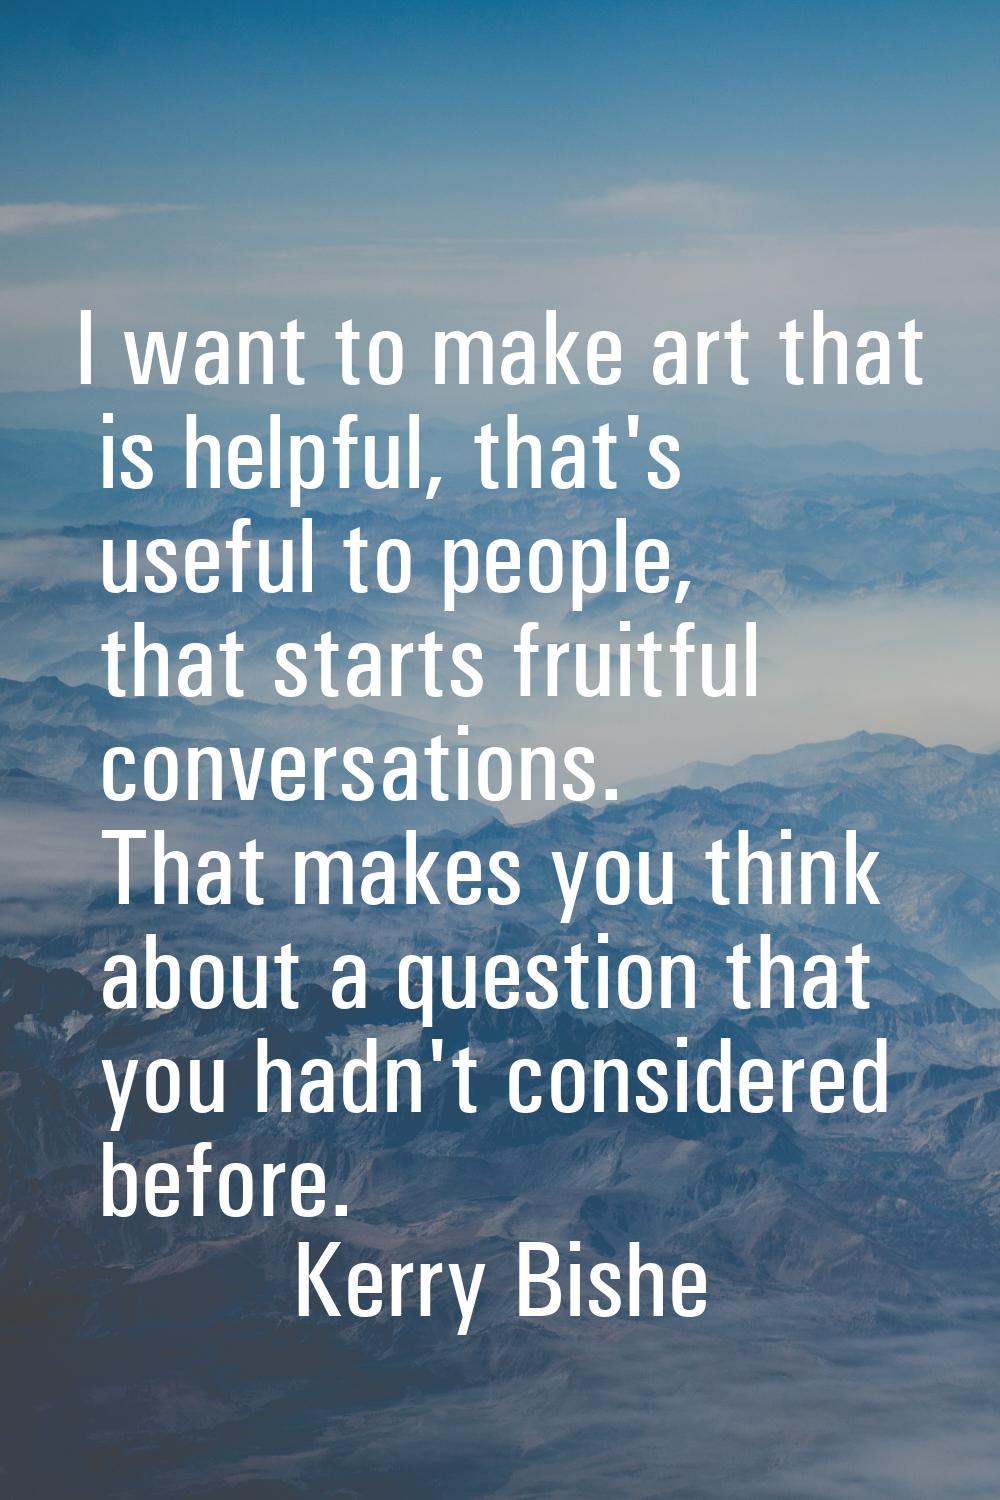 I want to make art that is helpful, that's useful to people, that starts fruitful conversations. Th